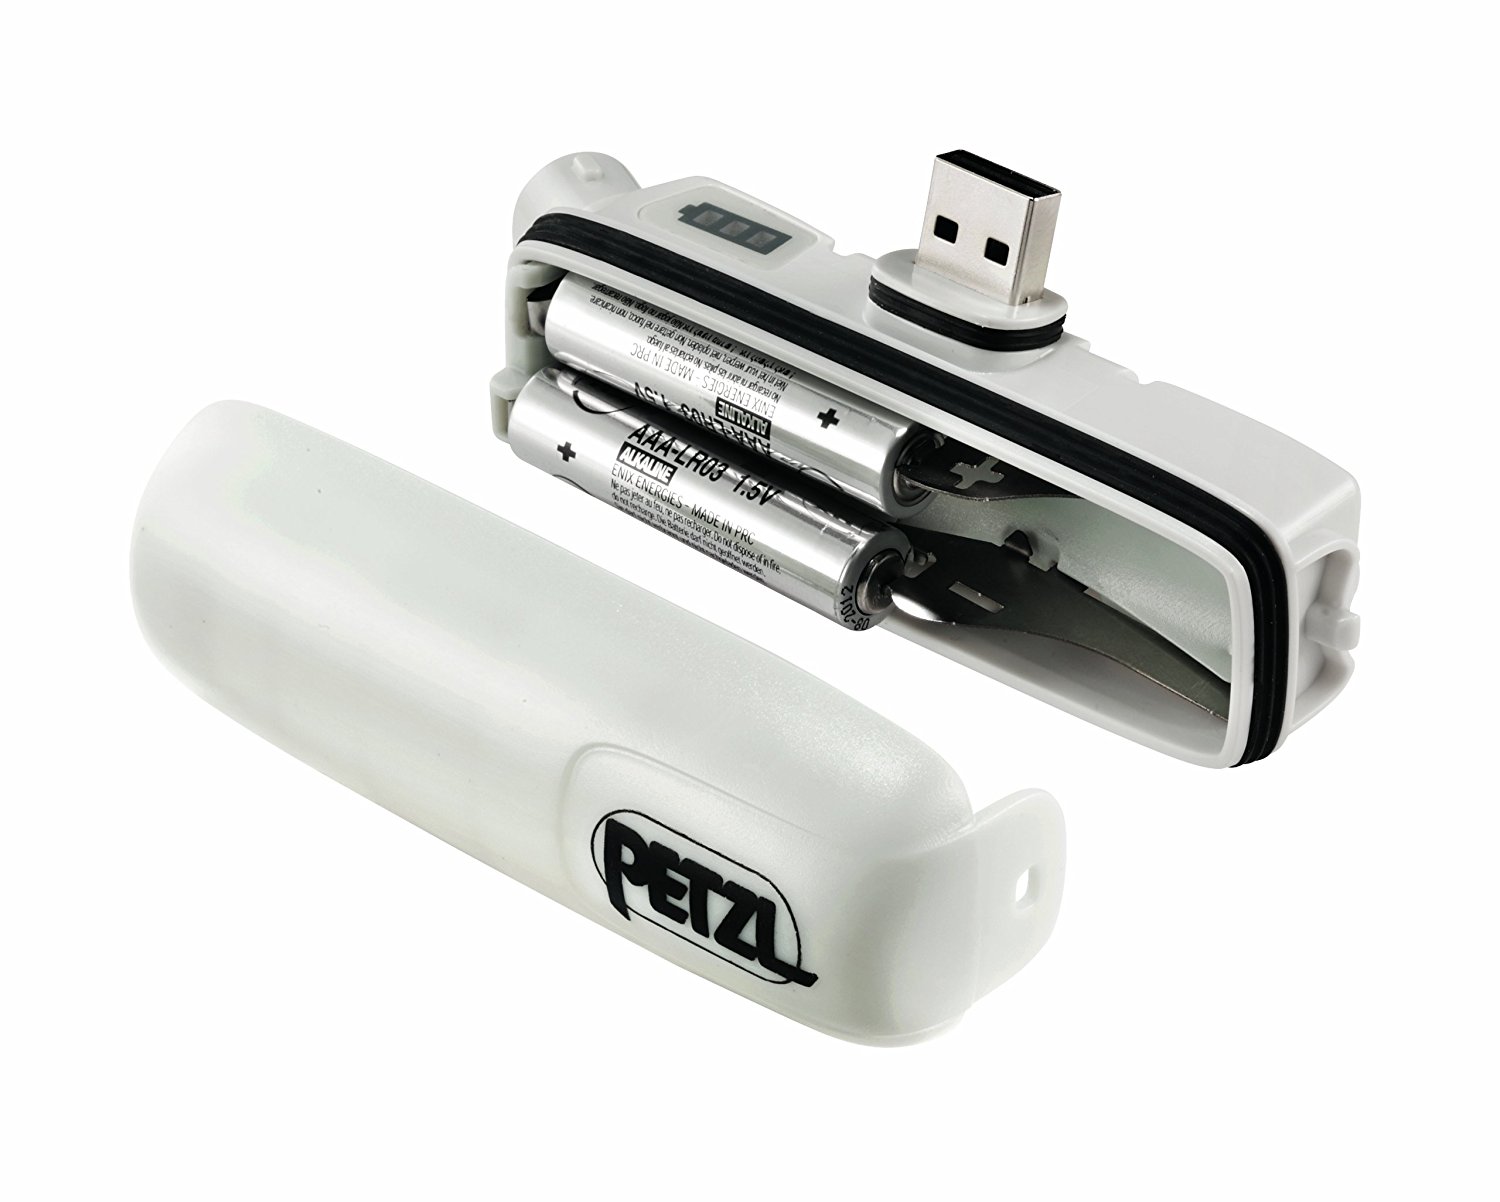 Battery compartment for Petzl Nao 2, showing two AAA batteries installed for emergency use.